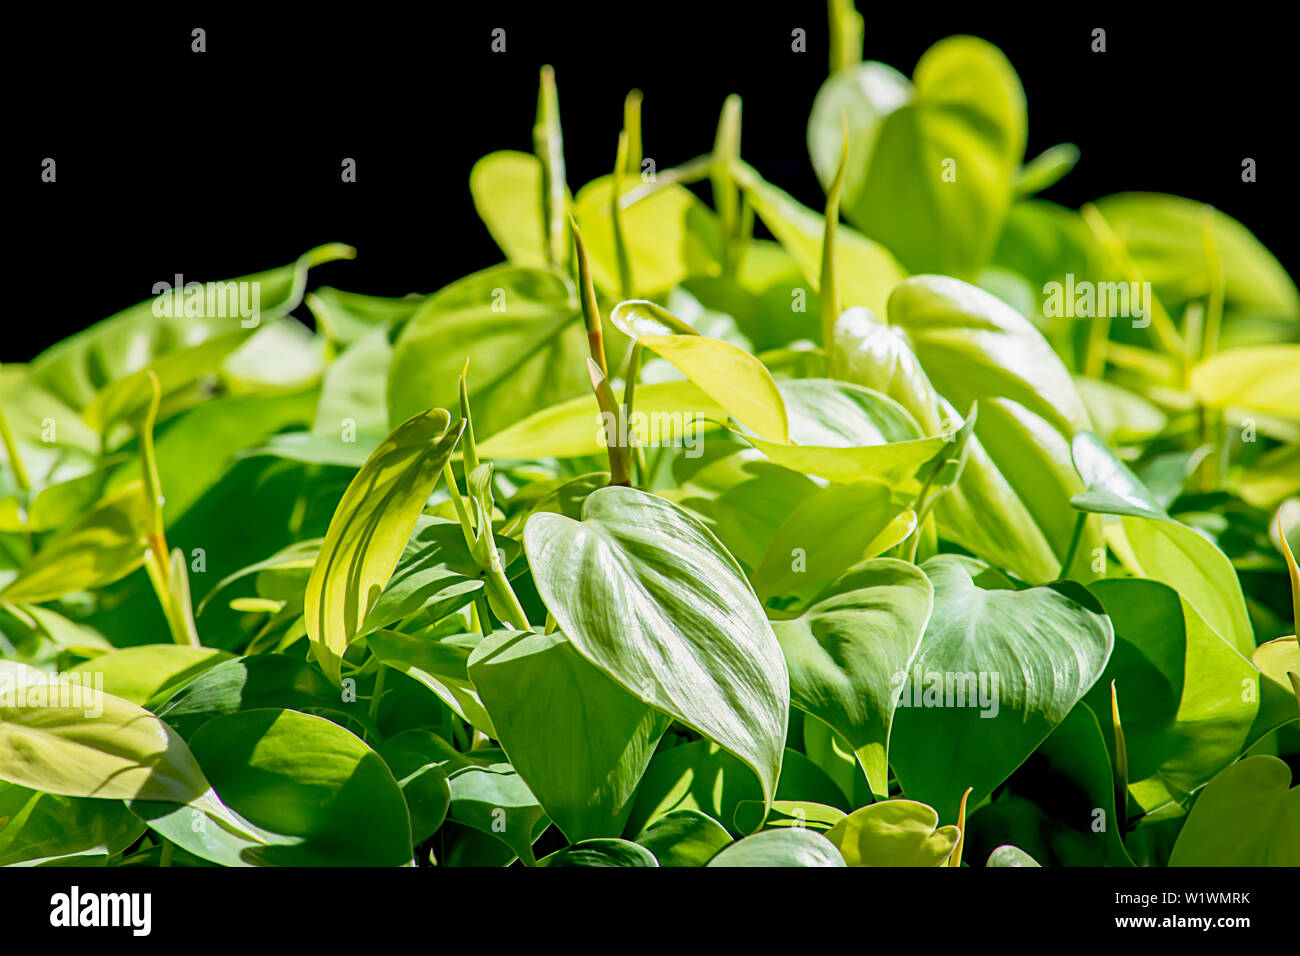 The beauty of green leaves or Aglaonema cochinchinense exposed to light on a black background. Stock Photo